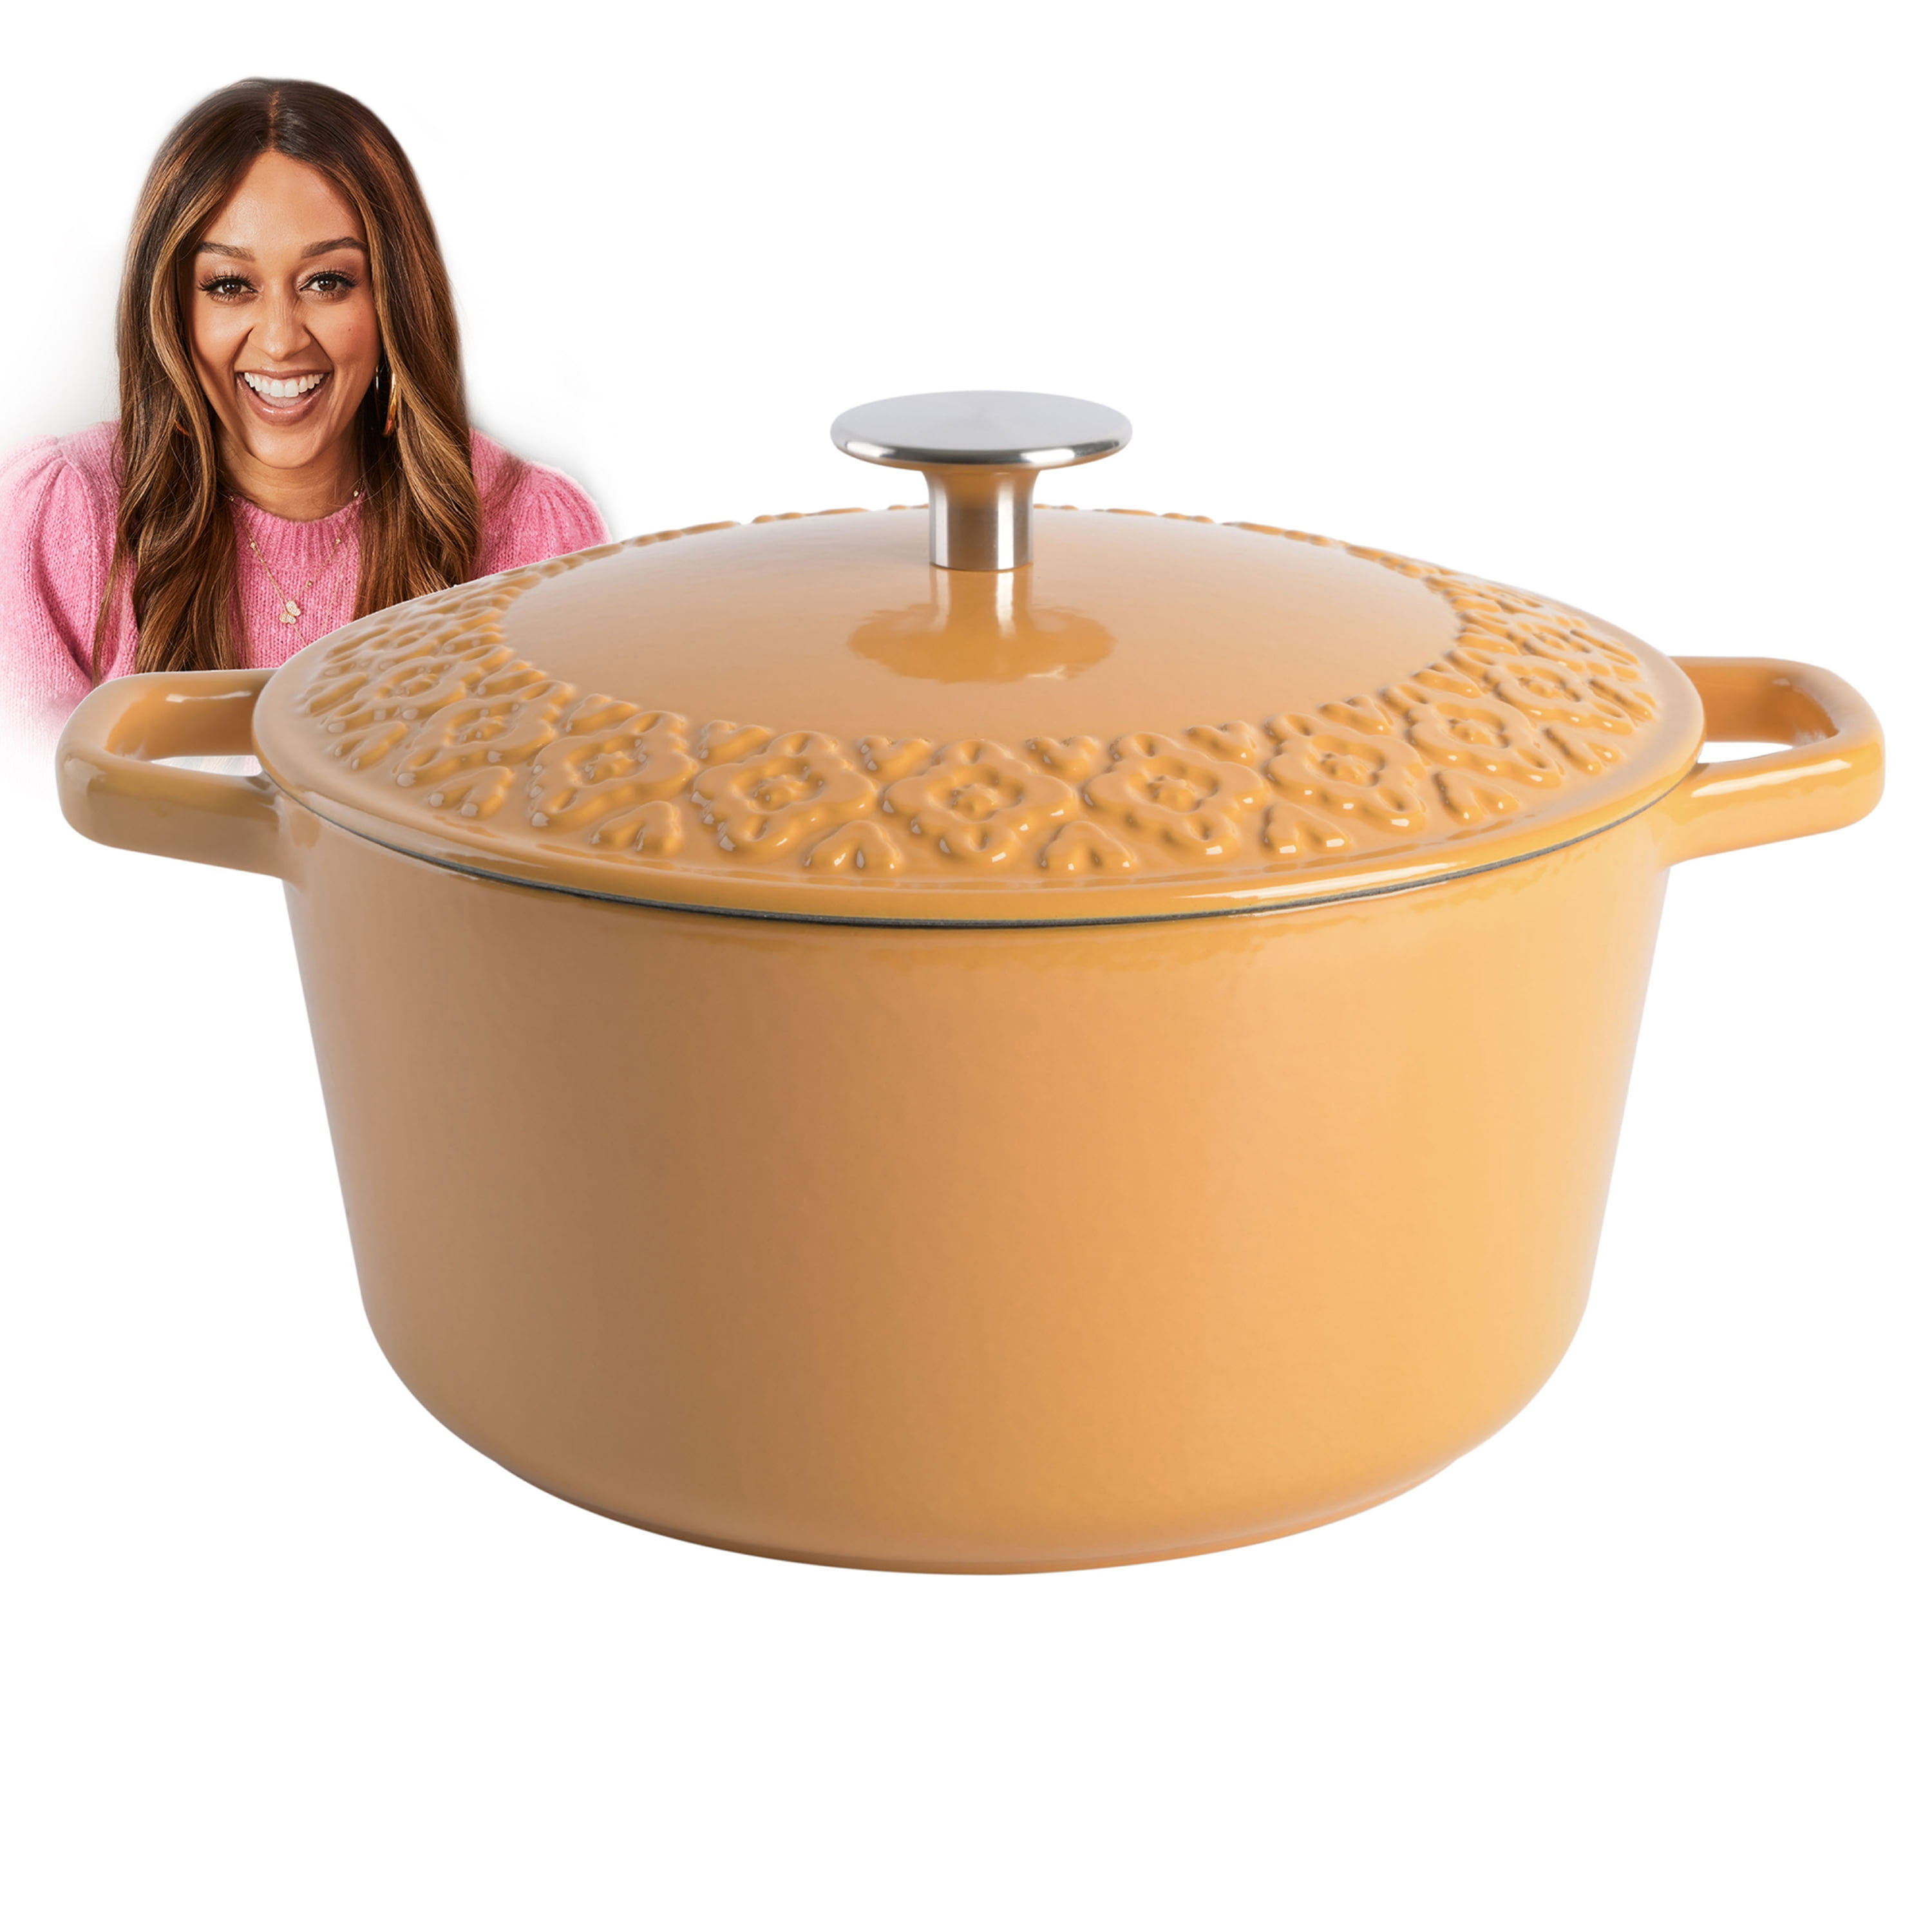 Spice BY TIA MOWRY Savory Saffron 6 qt. Enameled Cast Iron Dutch Oven with  Lid in Mint 985118380M - The Home Depot